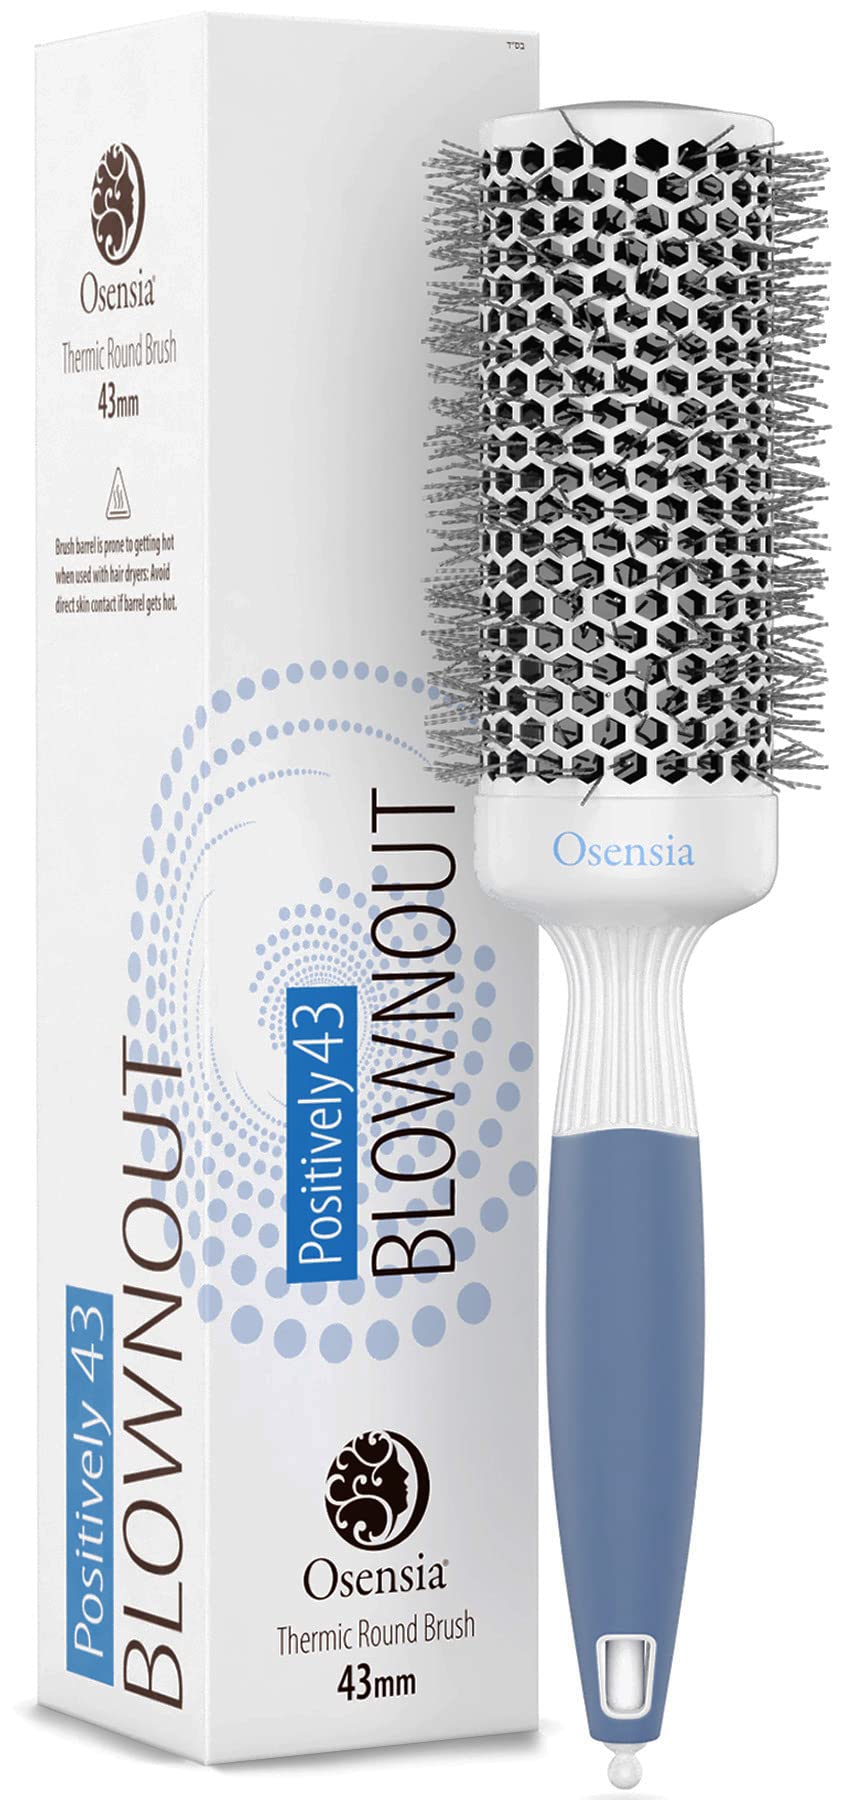 Round Brush for Blow Drying - Medium Ceramic Ionic Thermal Barrel Brush for  Precise Styling and Volume - Lightweight Round Hair Brush for Smooth,  Manageable Hair (1.7 Inch) (Not Electrical)